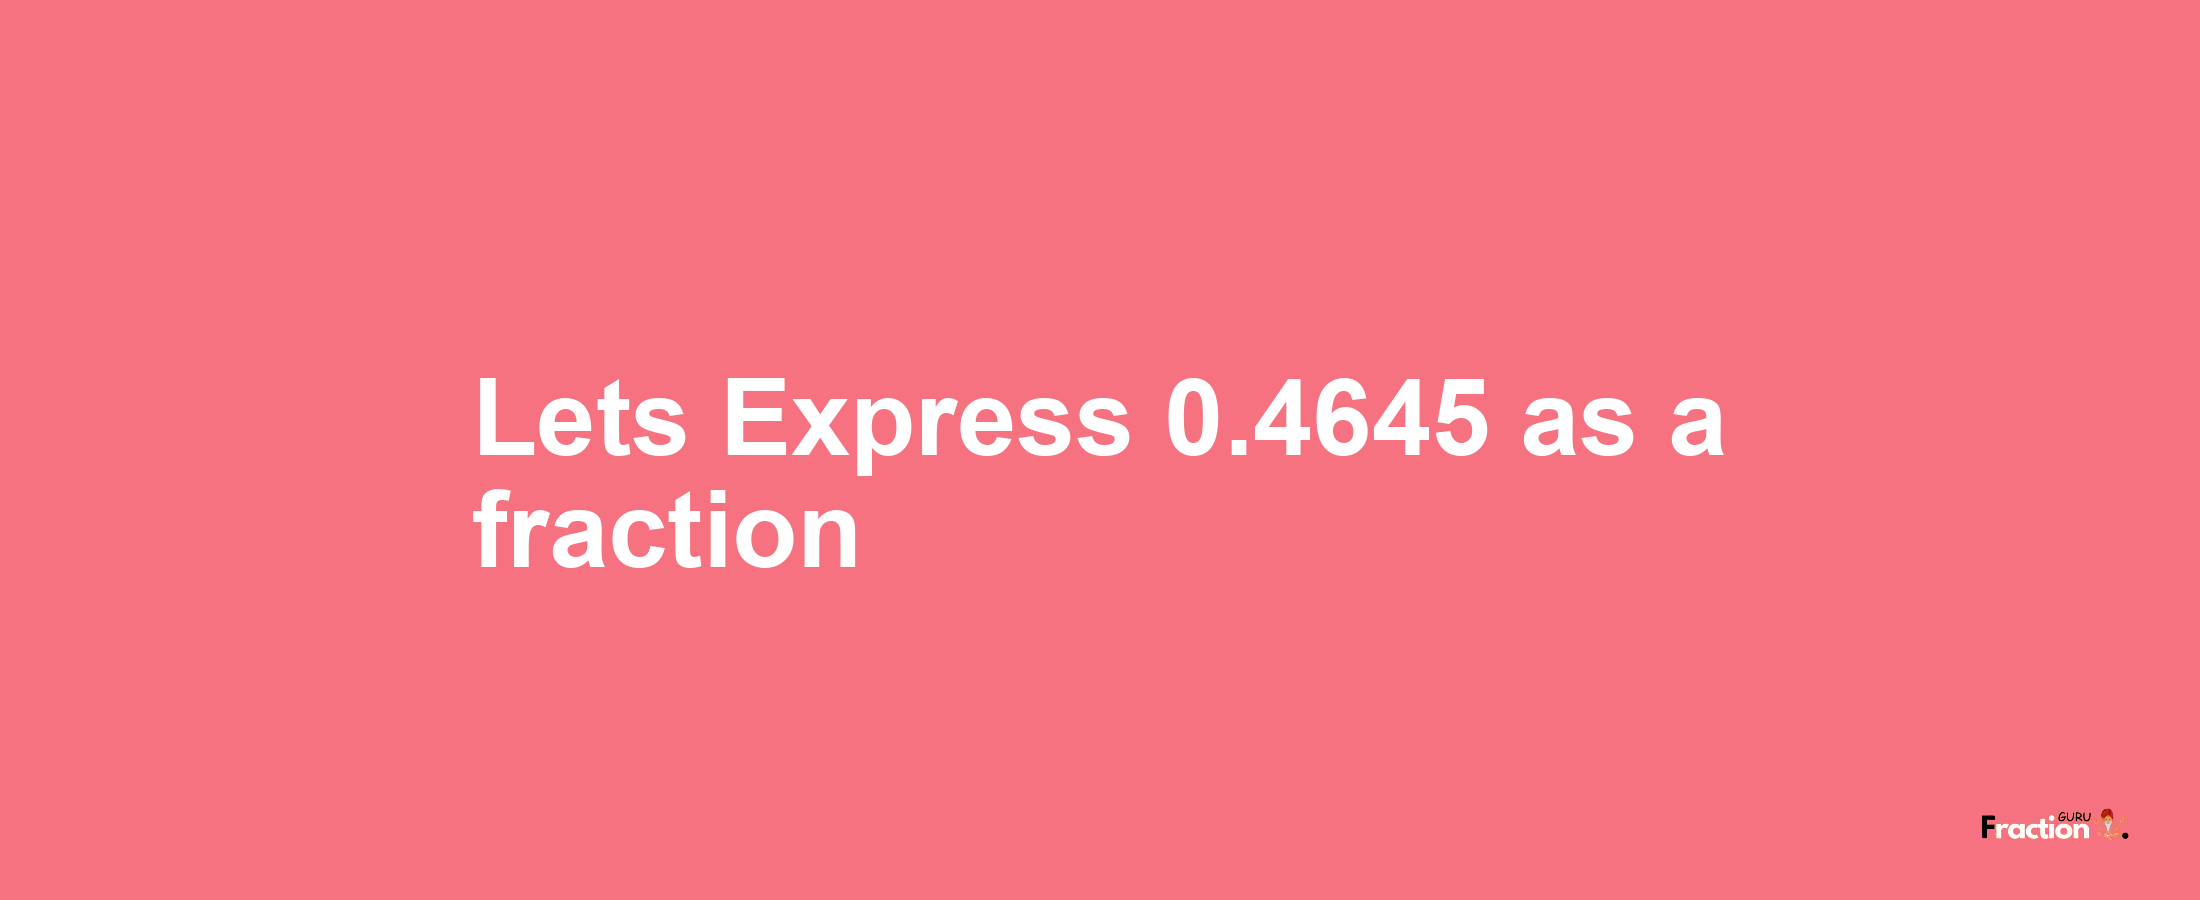 Lets Express 0.4645 as afraction